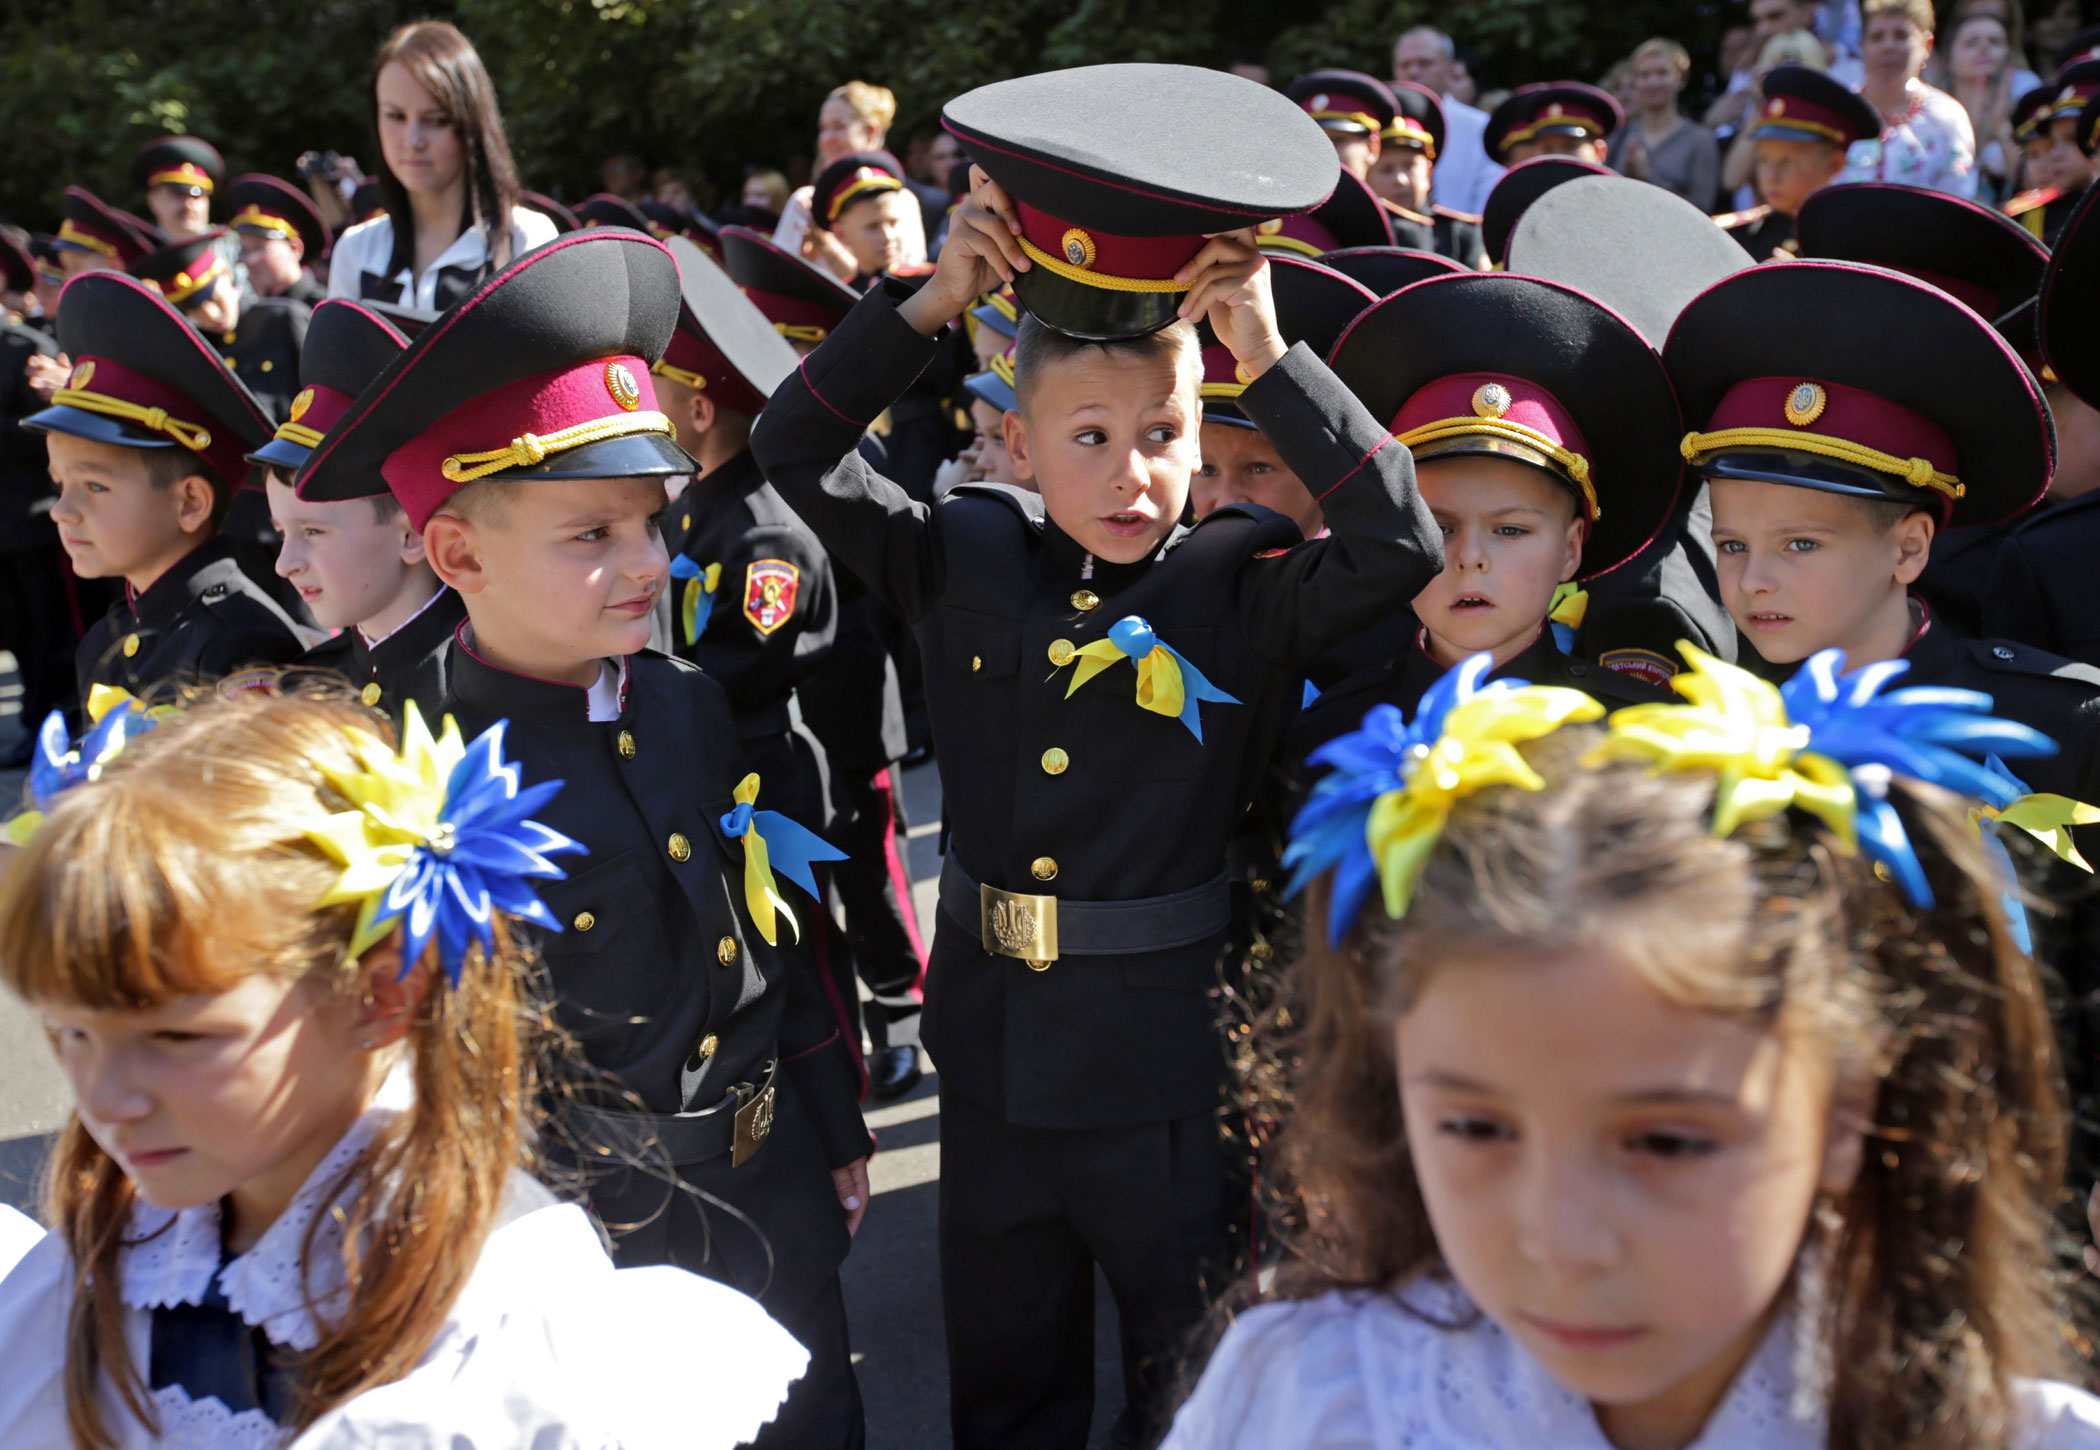 Ukrainian children from cadet's lyceum attend the first day of school, which marks the traditional start of the academic year in Kiev, Ukraine on Sept. 1, 2014.